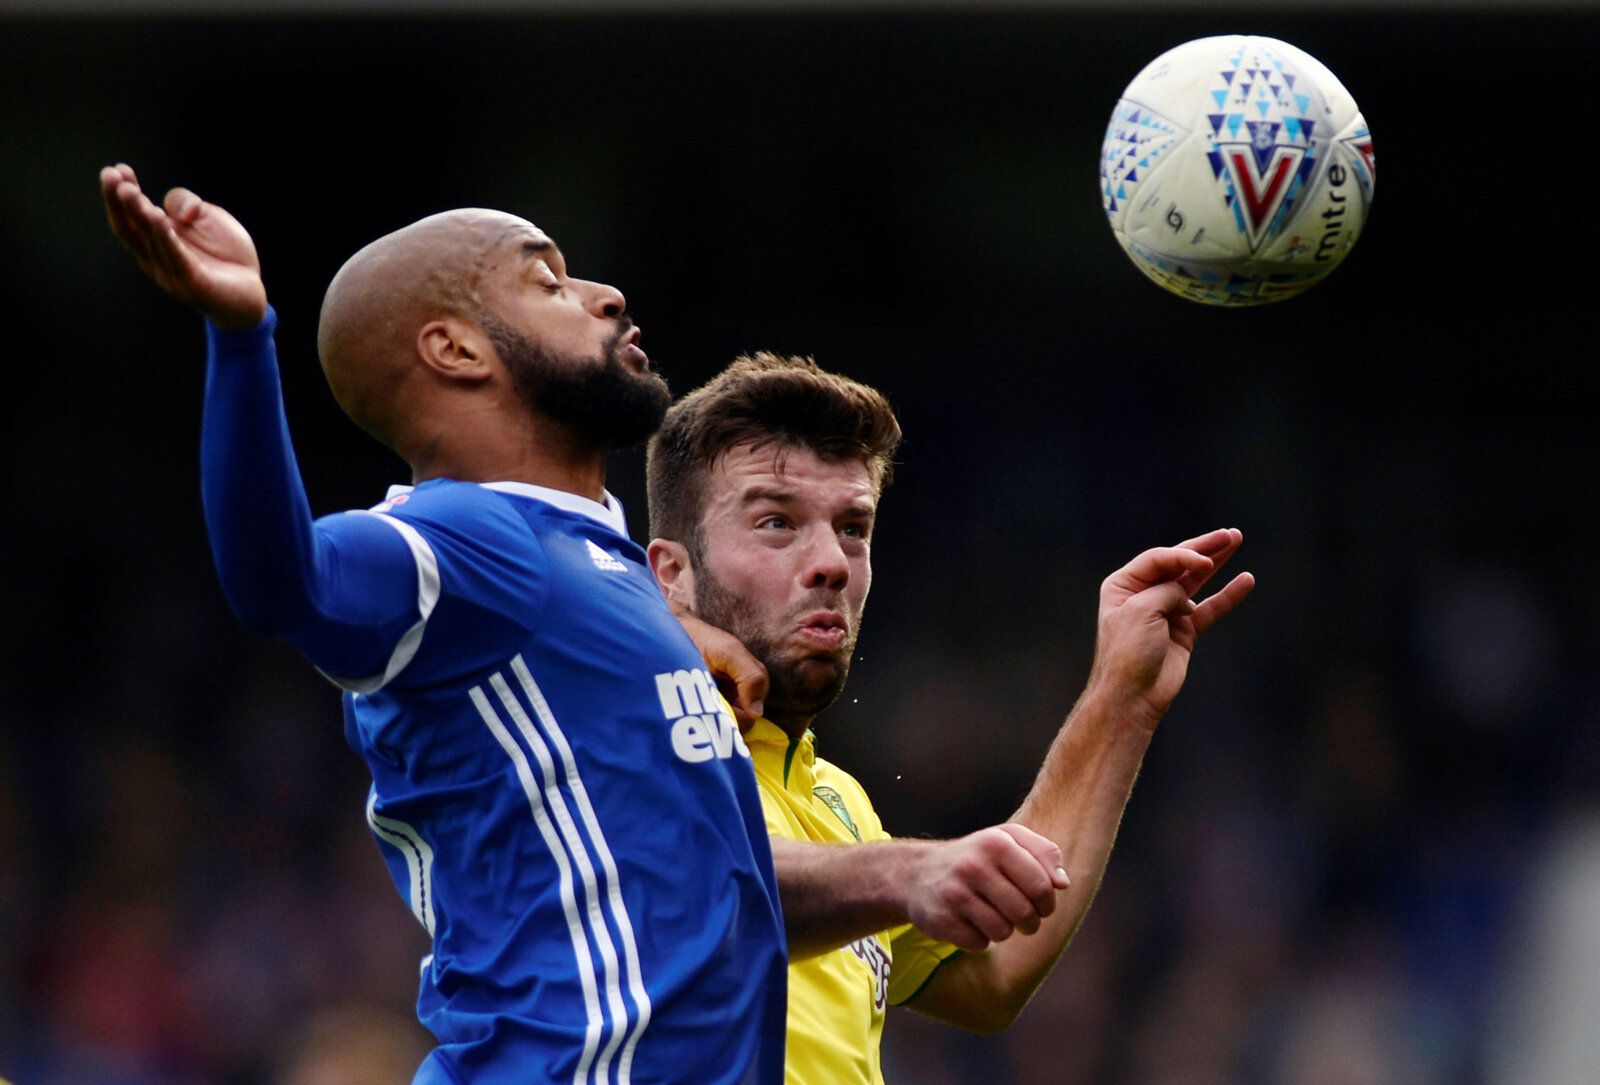 Soccer Football - Championship - Ipswich Town vs Norwich City - Portman Road, Ipswich, Britain - October 22, 2017  Ipswich Town's David McGoldrick in action with Norwich City's Grant Hanley   Action Images/Adam Holt  EDITORIAL USE ONLY. No use with unauthorized audio, video, data, fixture lists, club/league logos or 